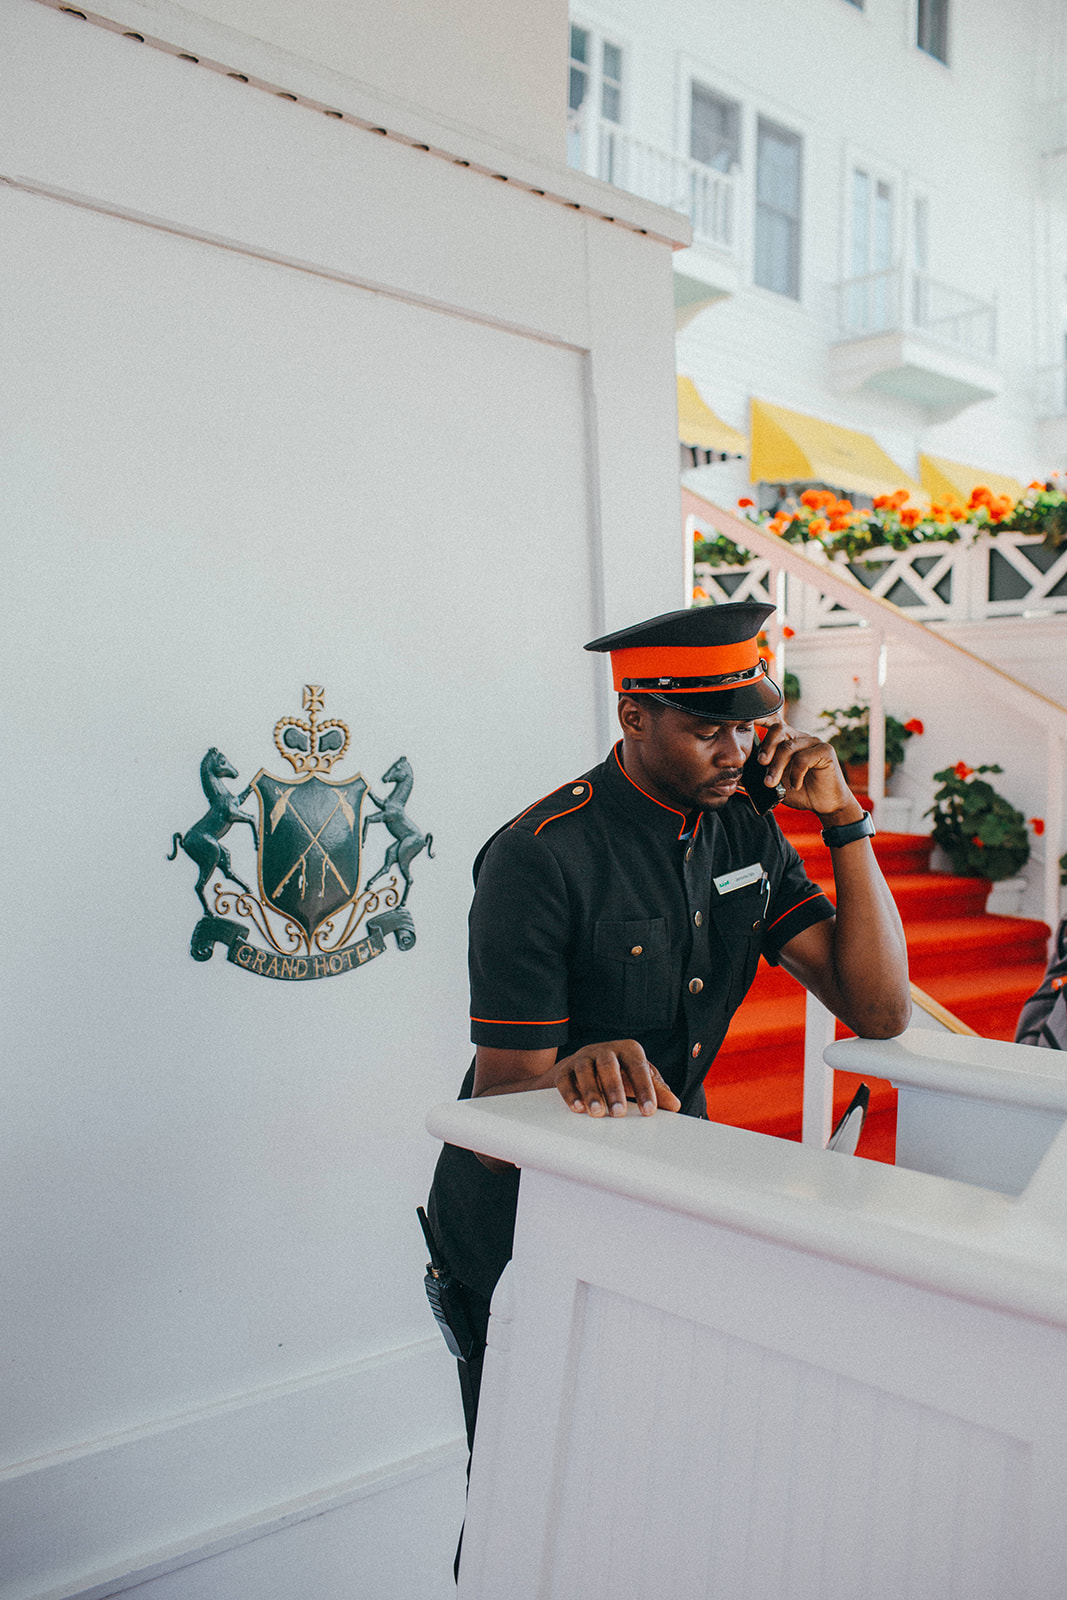 Gorgeous wedding details of an attendant at Mackinac Island's Grand Hotel